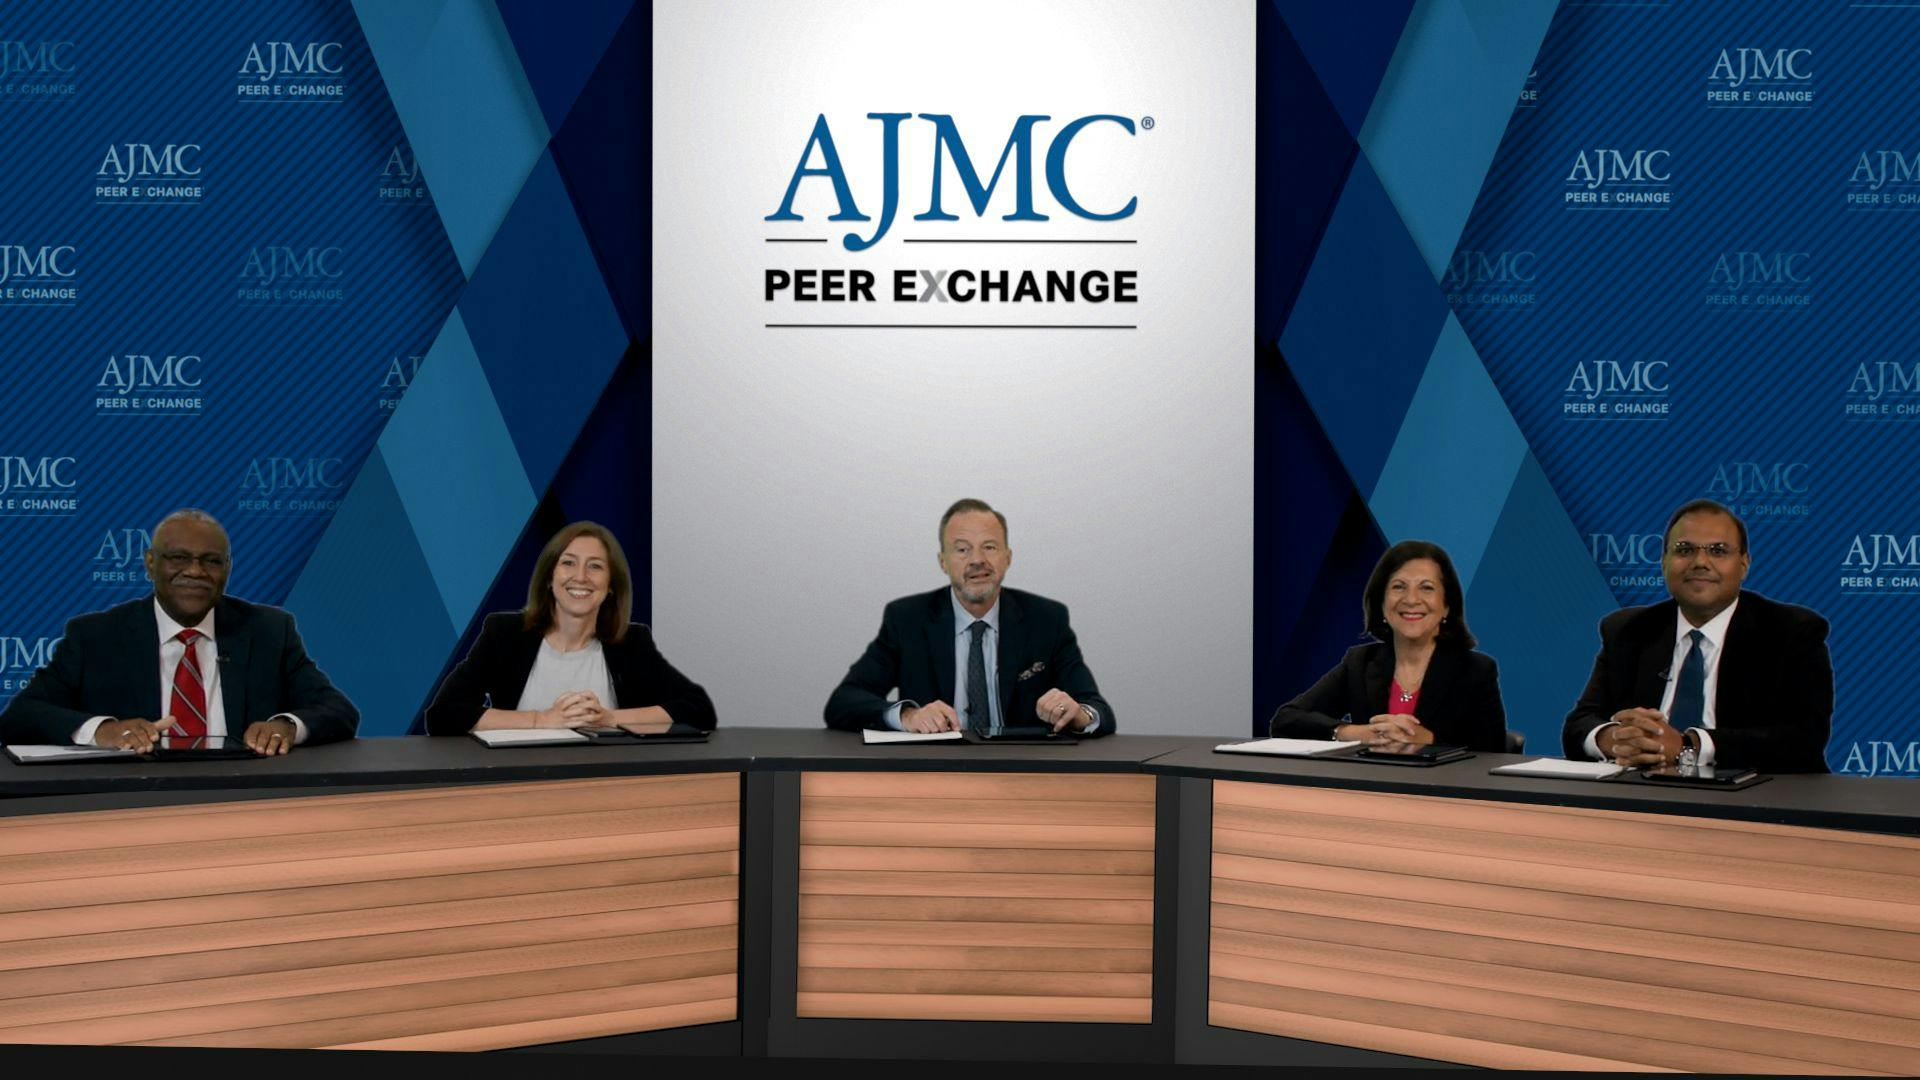 AJMC - "Important Updates in the Management of Patients with Heart Failure"